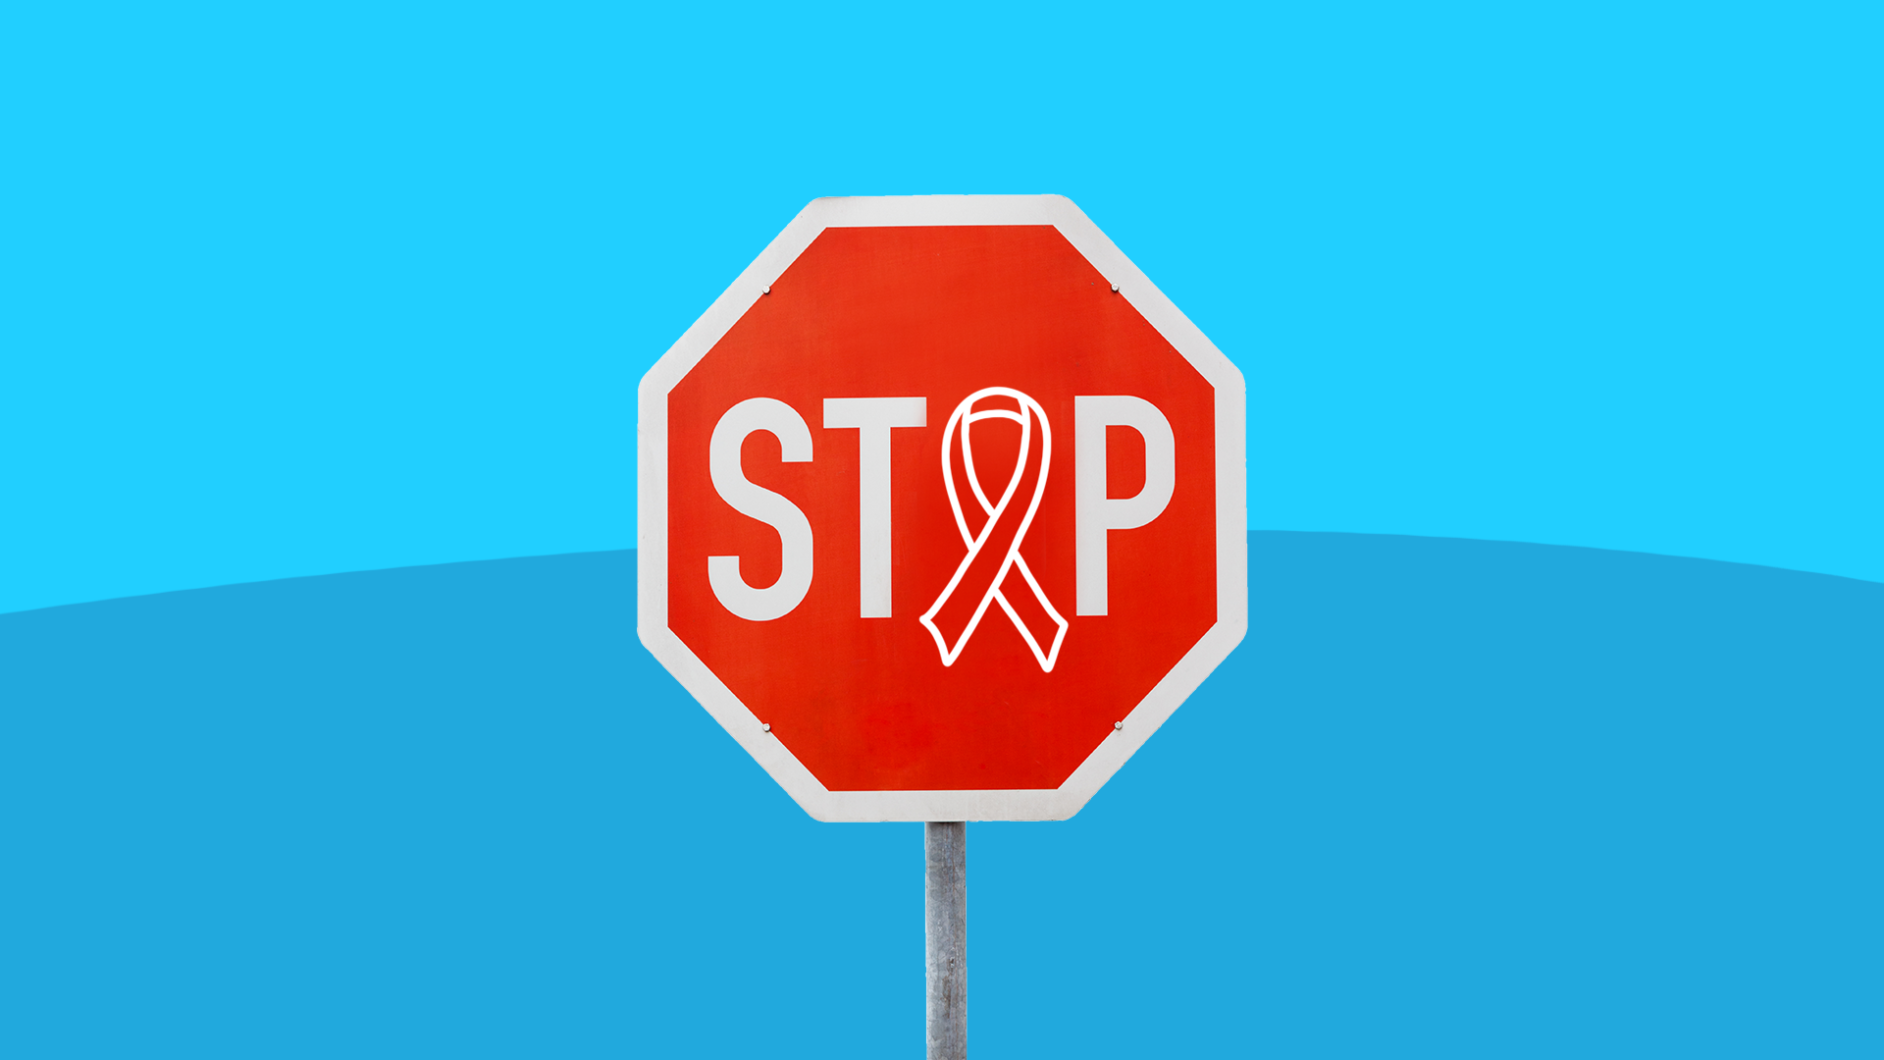 steps to prevent cancer - stop sign